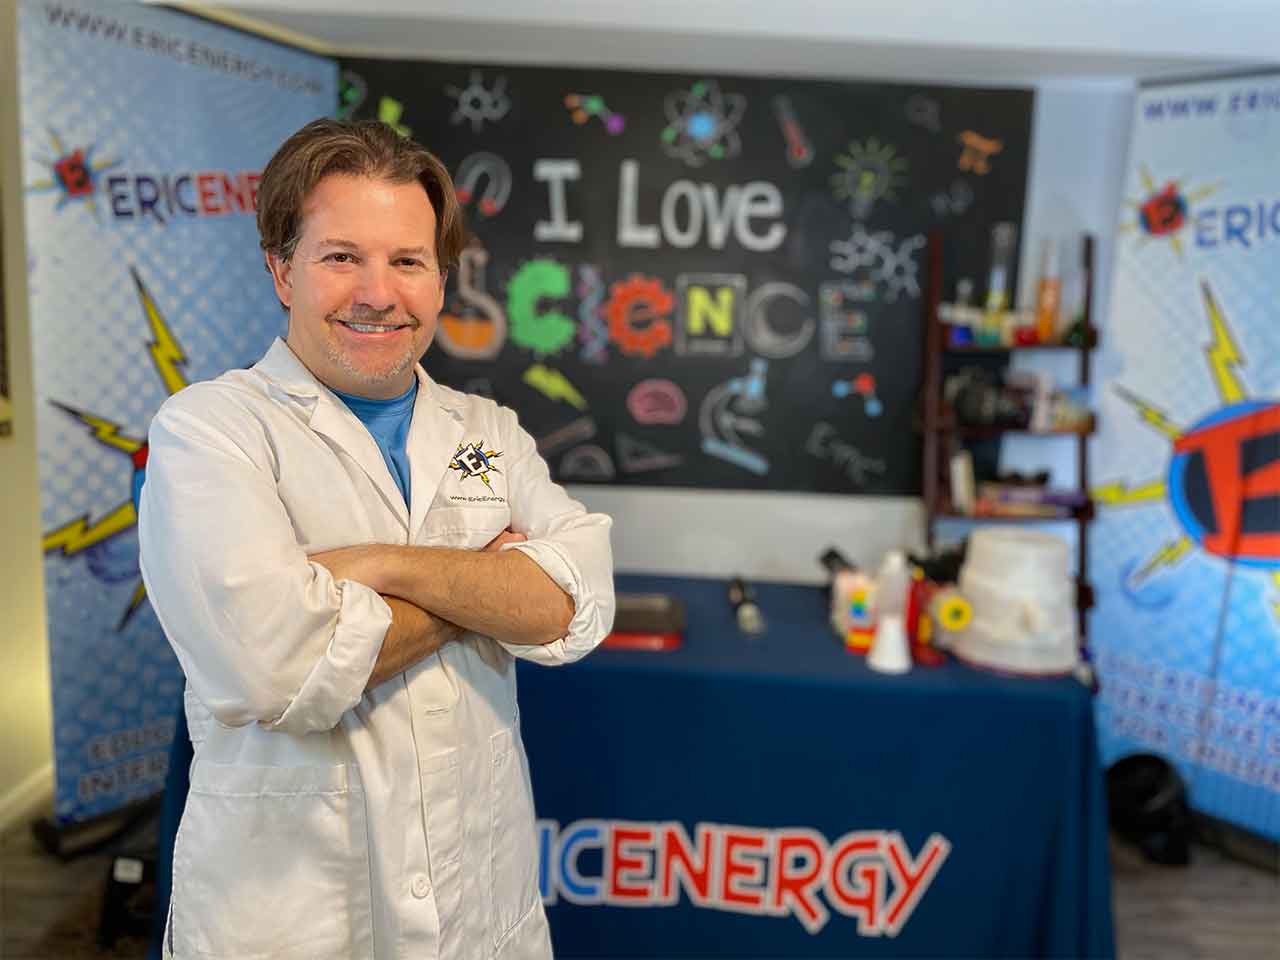 Eric Energy Science Shows for Kids